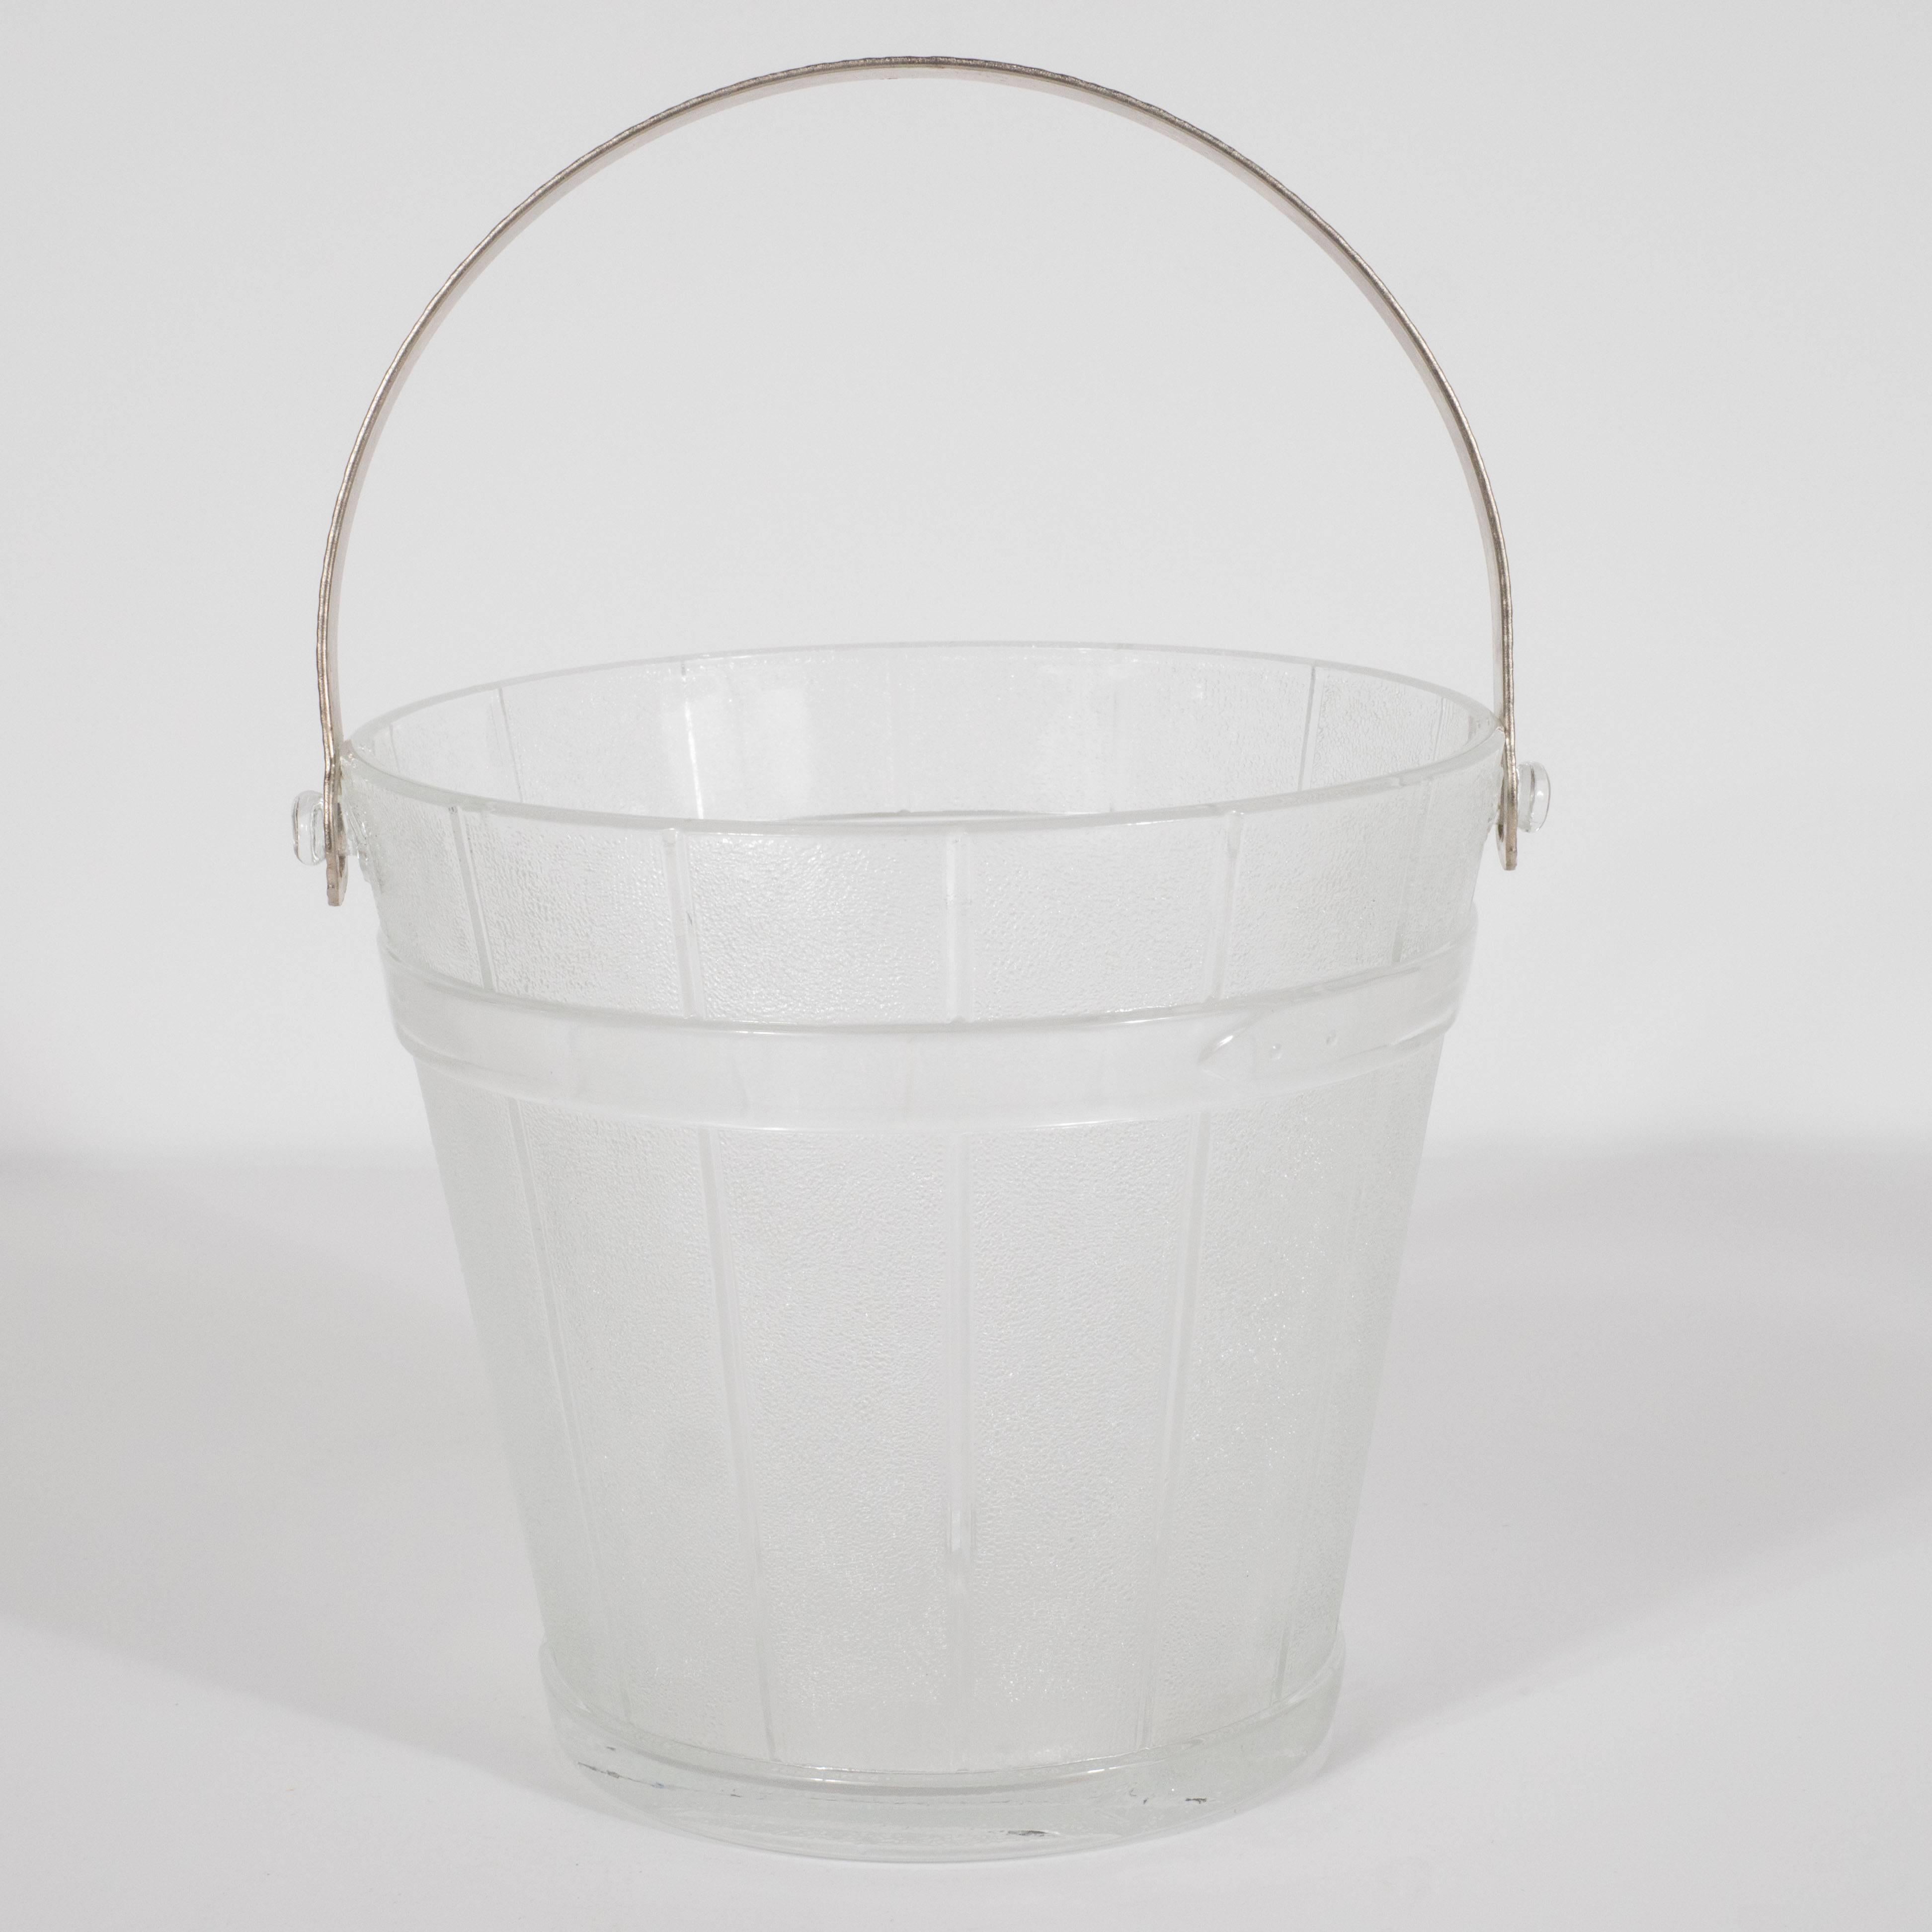 This sophisticated and stylish ice bucket was realized in the United States, circa 1930. Its form represents a stylized interpretation of a wooden water pail- an emblem of classical Americana, here elevated for the Machine Age. The wooden slats have